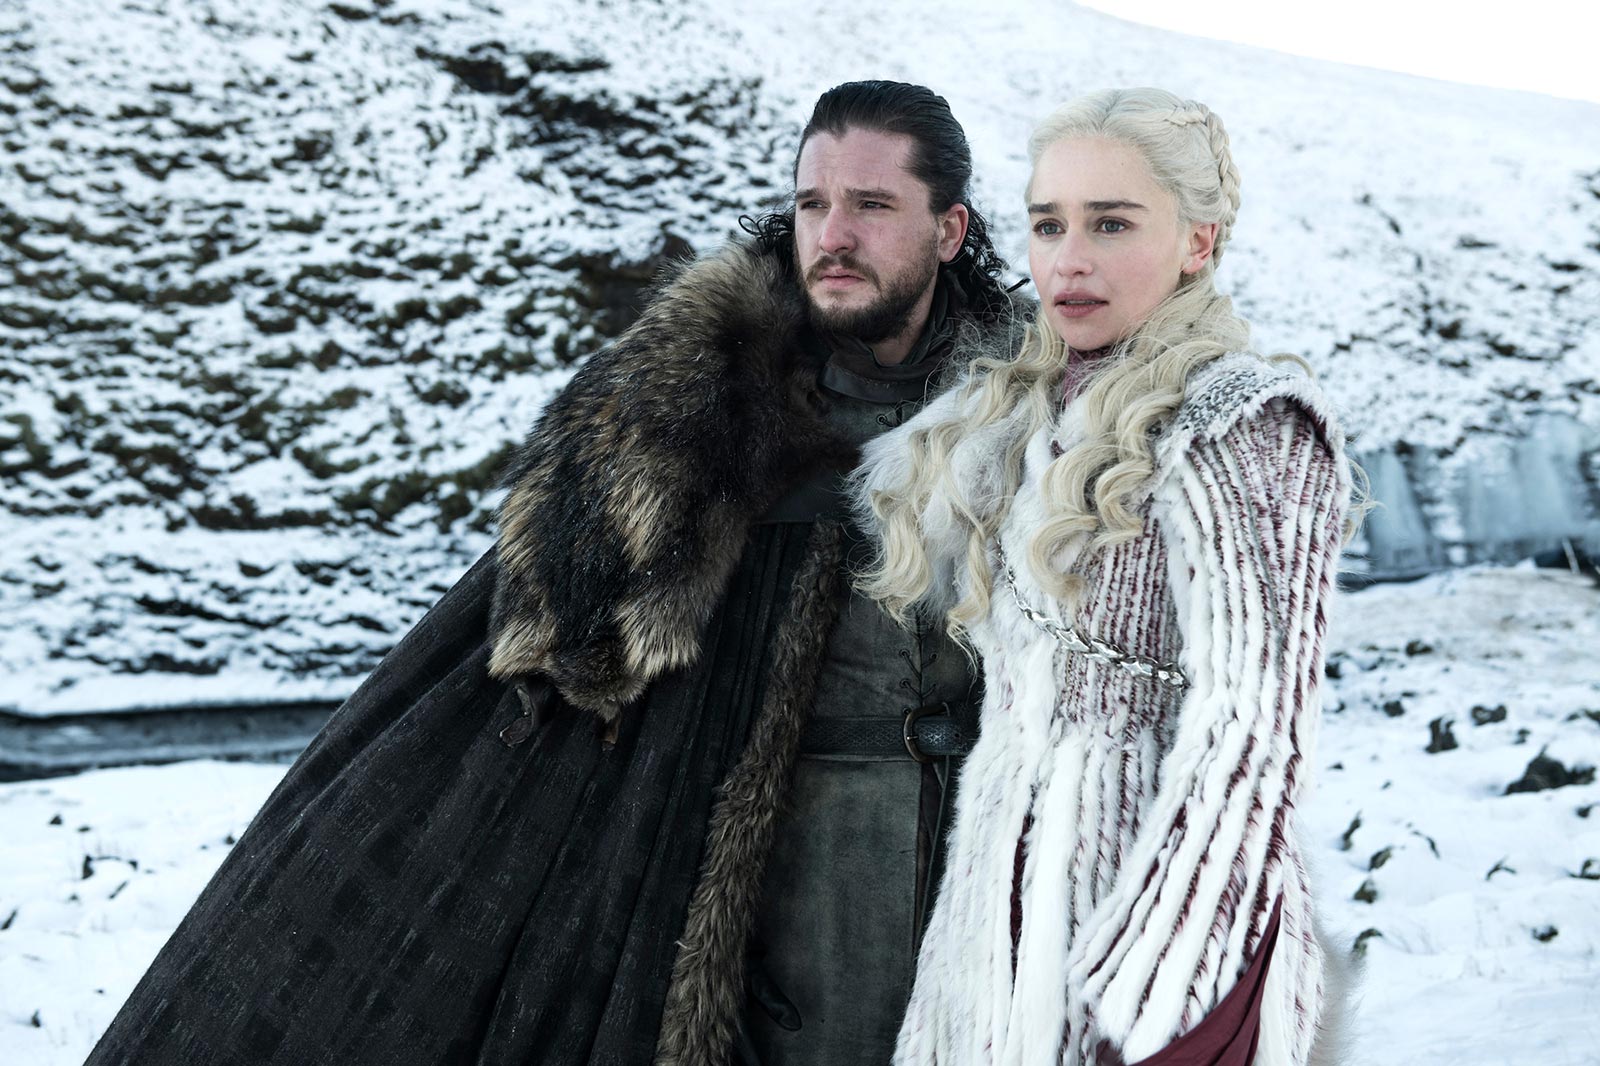 ⚔️ Only “Game of Thrones” Experts Can Pass This Season 7 Quiz. Can You? Jon Snow and Daenerys Targaryen